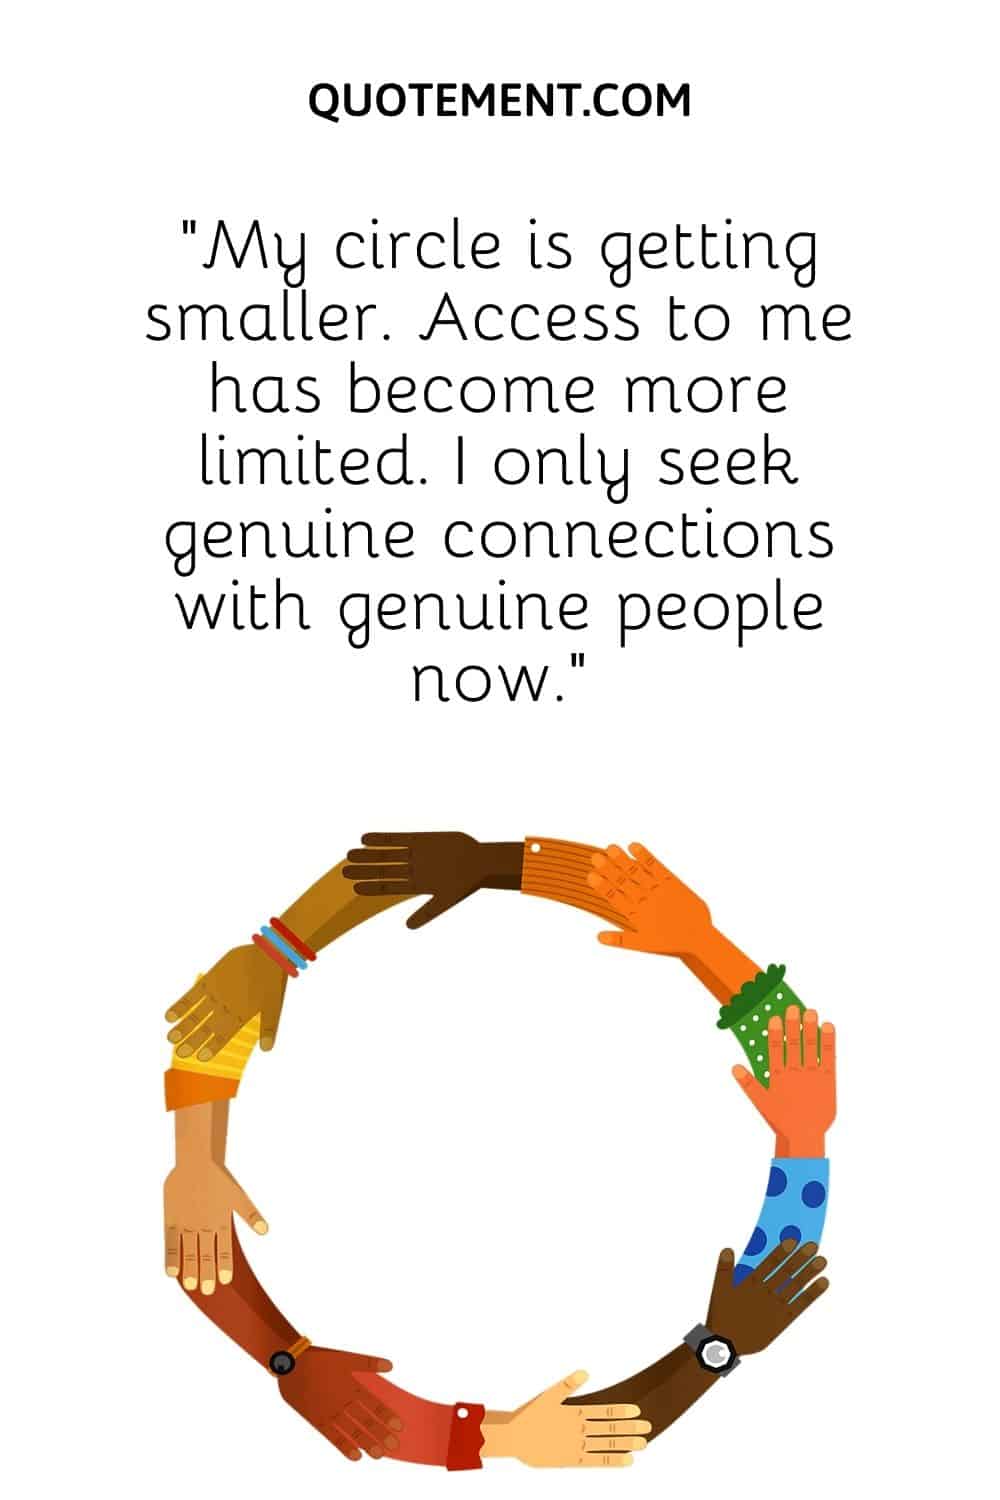 “My circle is getting smaller. Access to me has become more limited. I only seek genuine connections with genuine people now.”